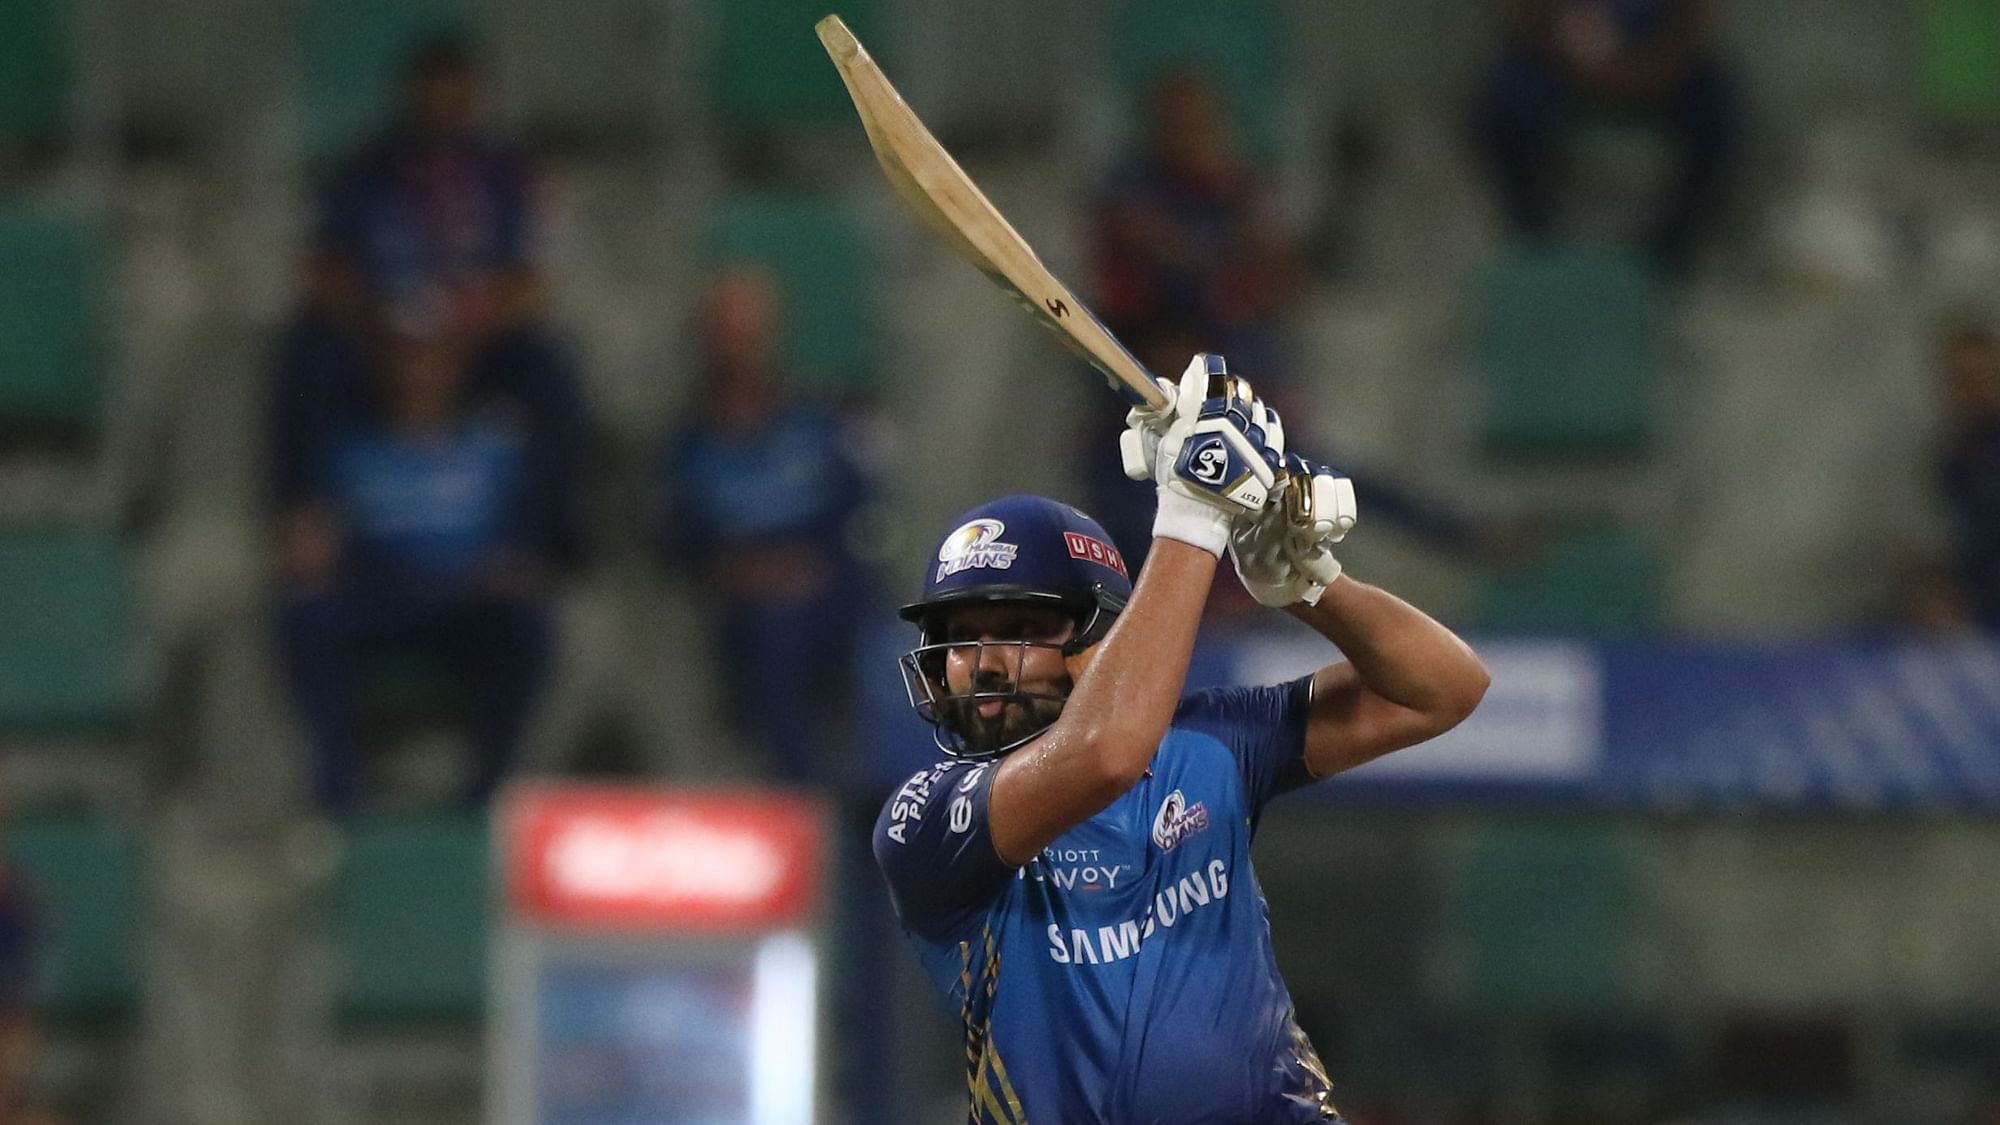 Mumbai Indians defeated the Kolkata Knight Riders by 49 runs to register their maiden win of the 13th Indian Premier League (IPL).